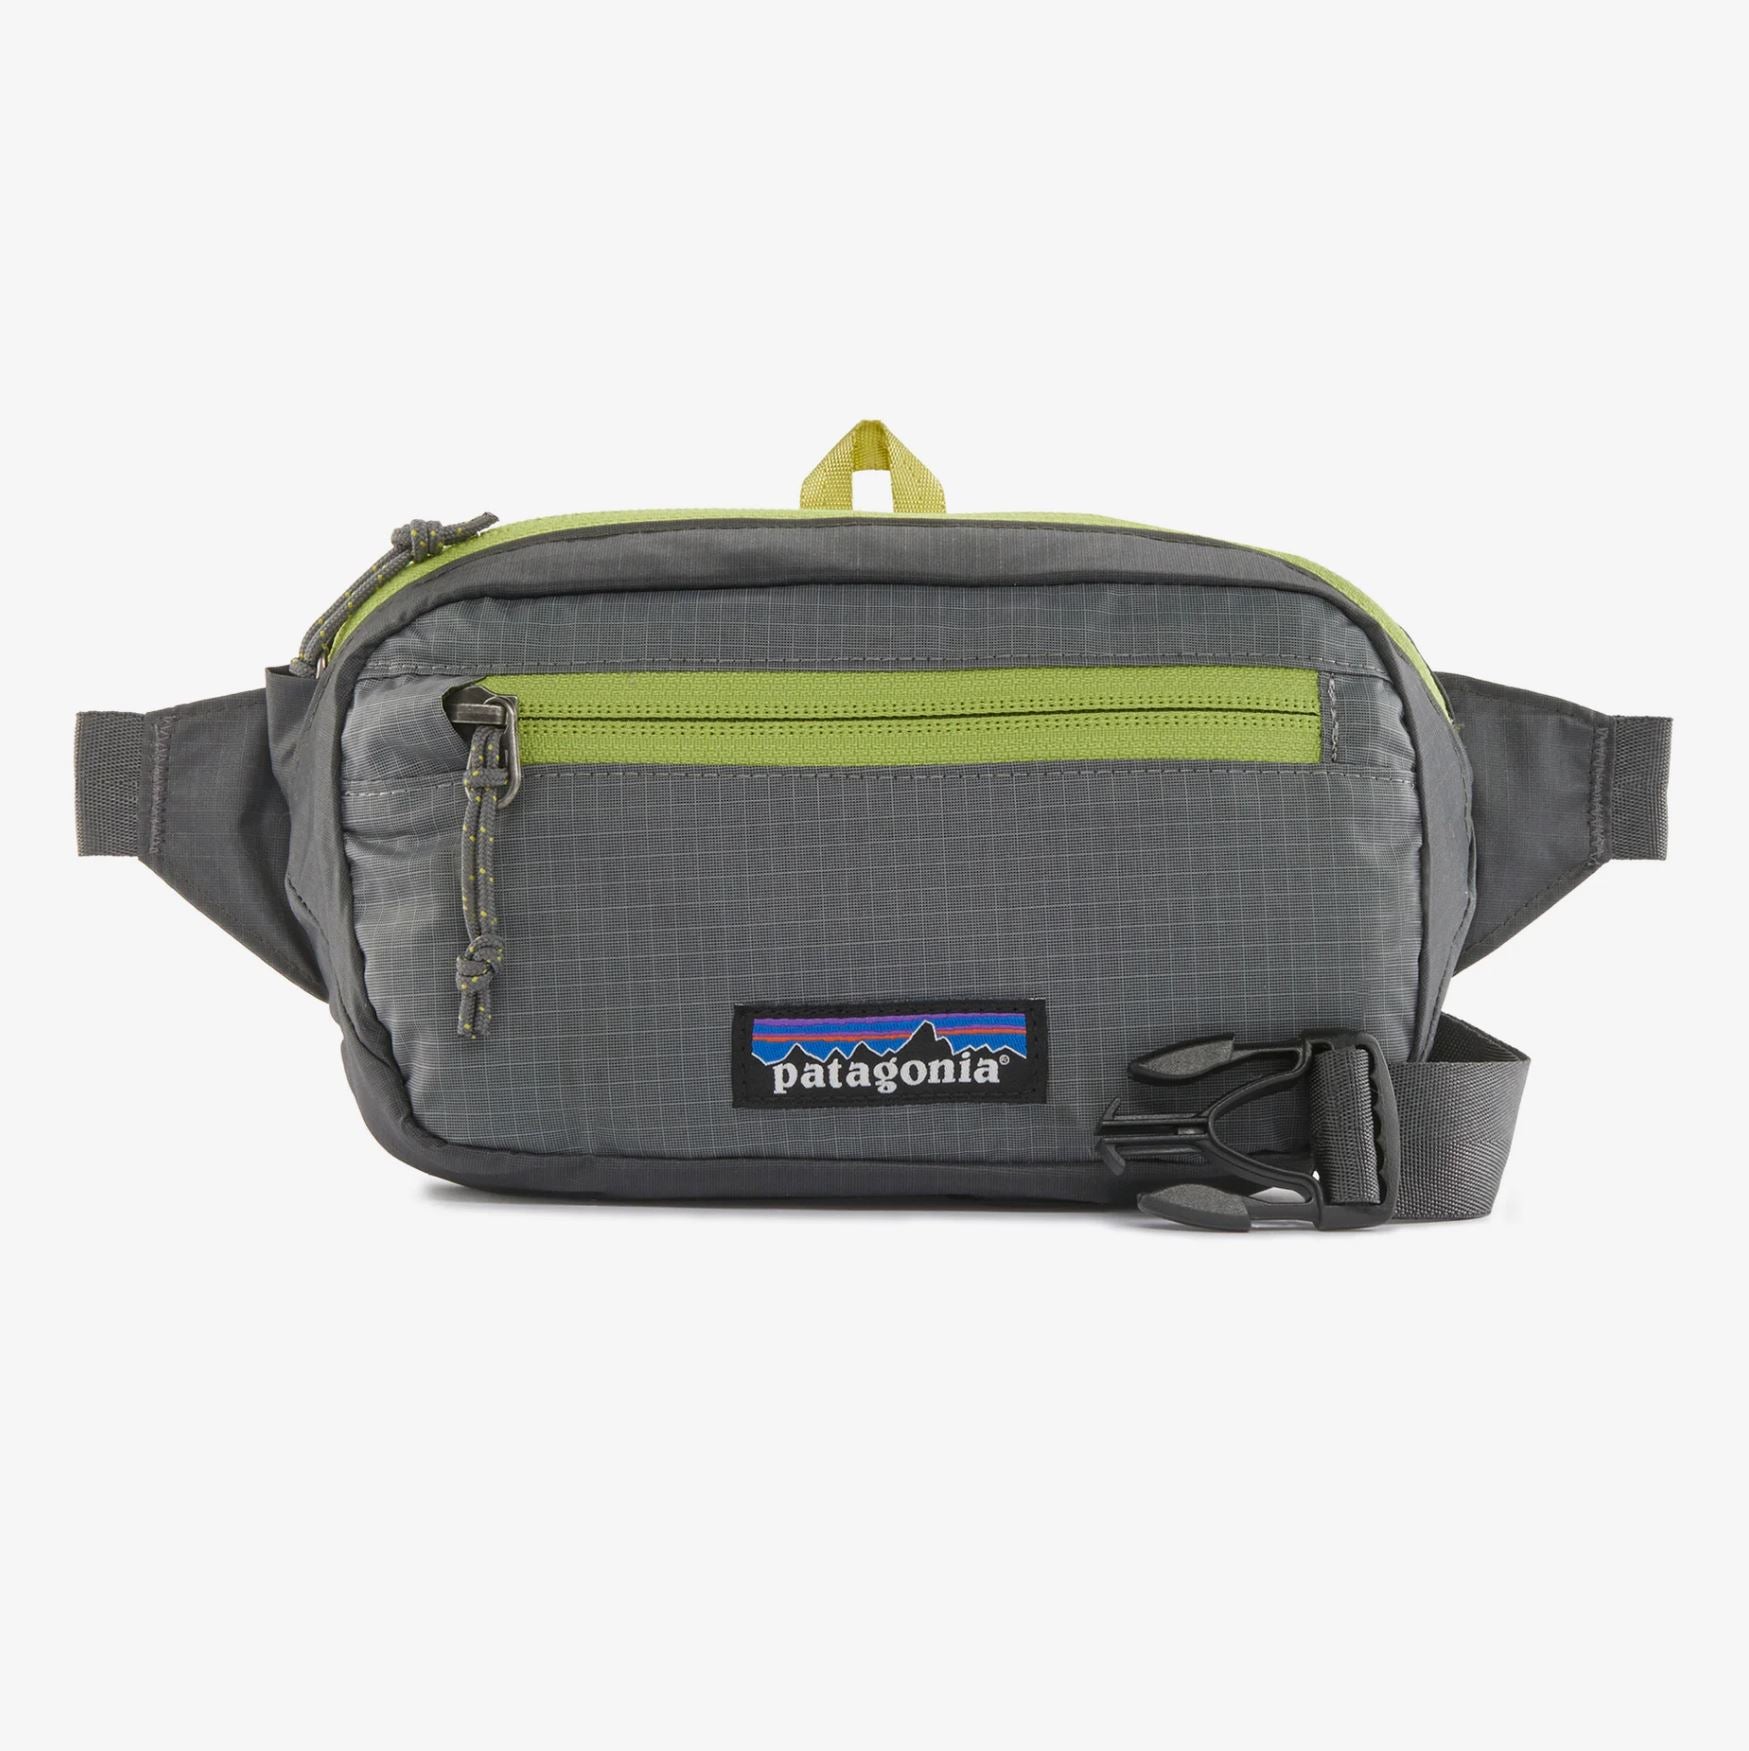 patagonia ultralight black hole mini hip pack in the color forge grey